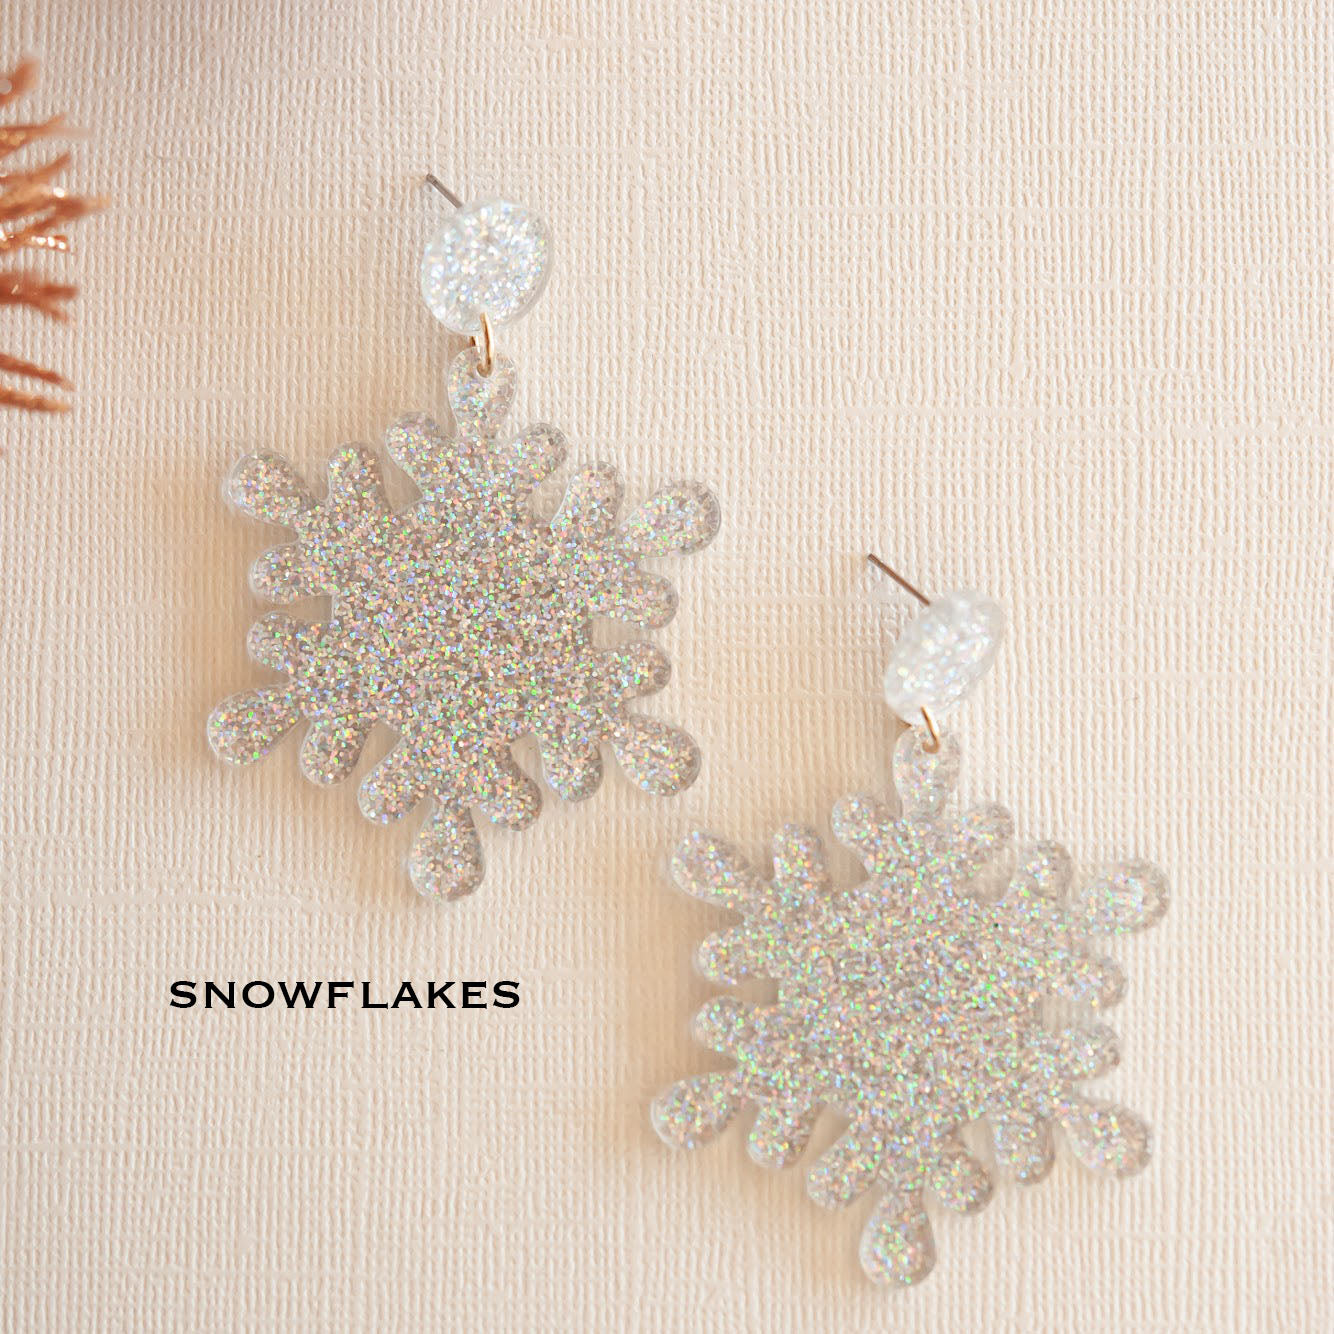 Load image into Gallery viewer, Vintage Inspired Christmas Earrings | Festive Jewelry Gift | Novelty Holiday Earrings | Snowflakes
